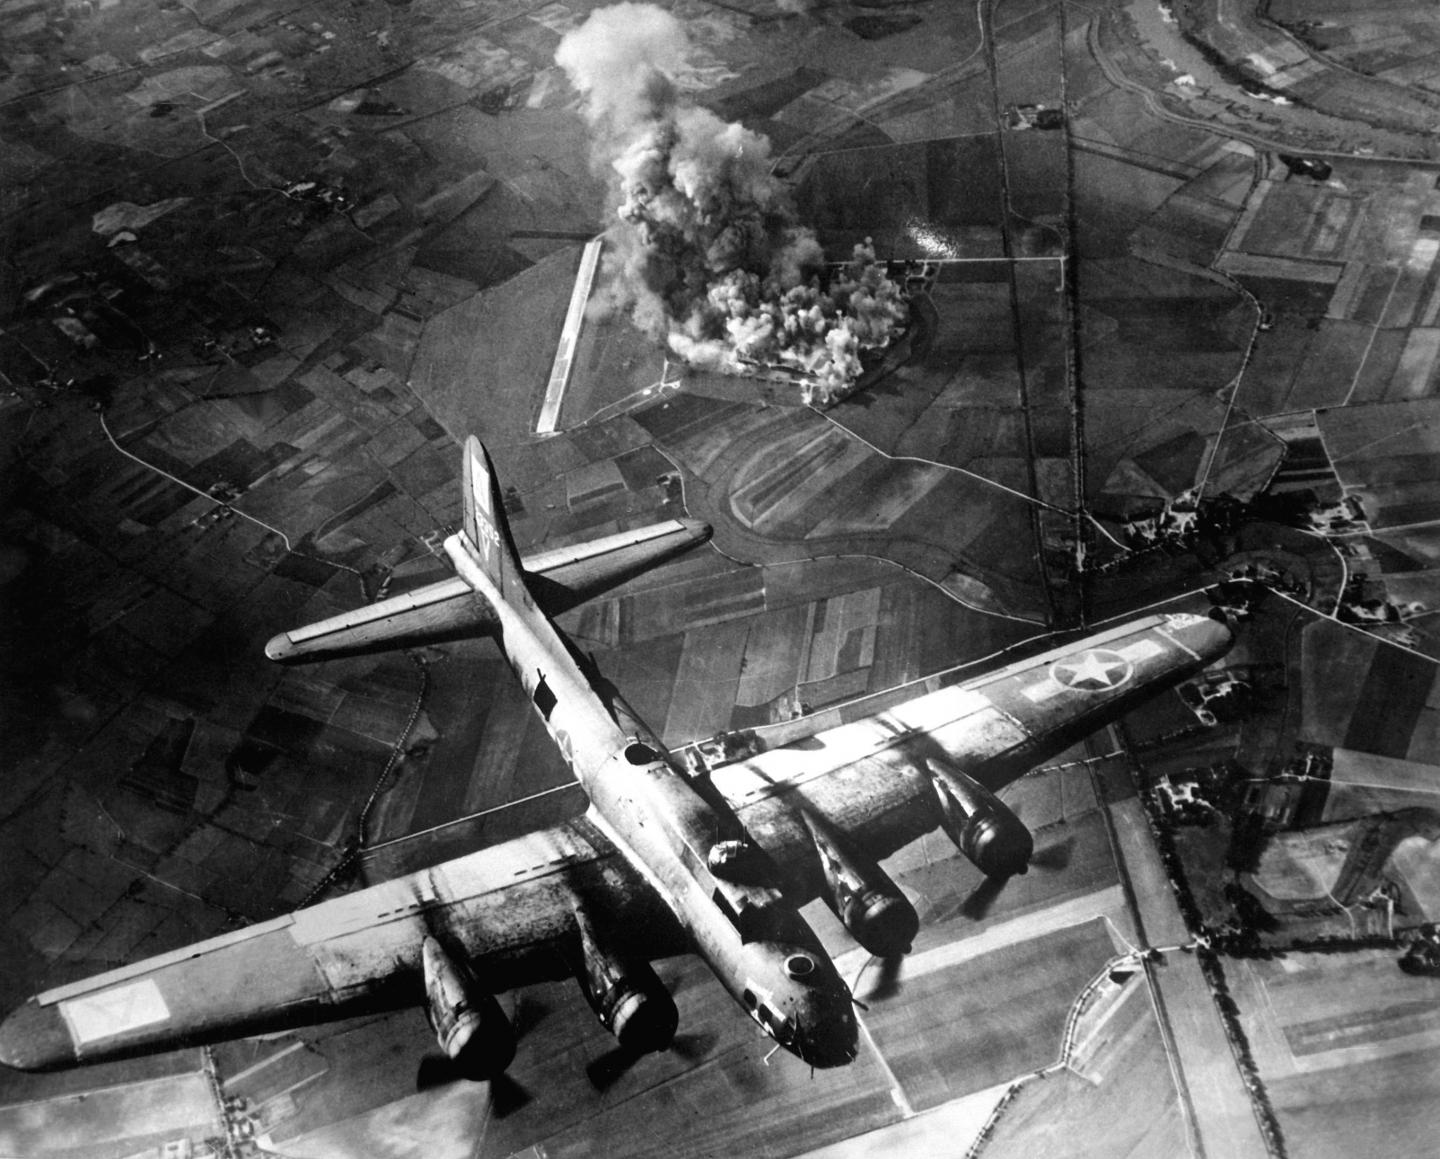 Bombing of a Factory at Marienburg, Germany, on Oct. 9, 1943